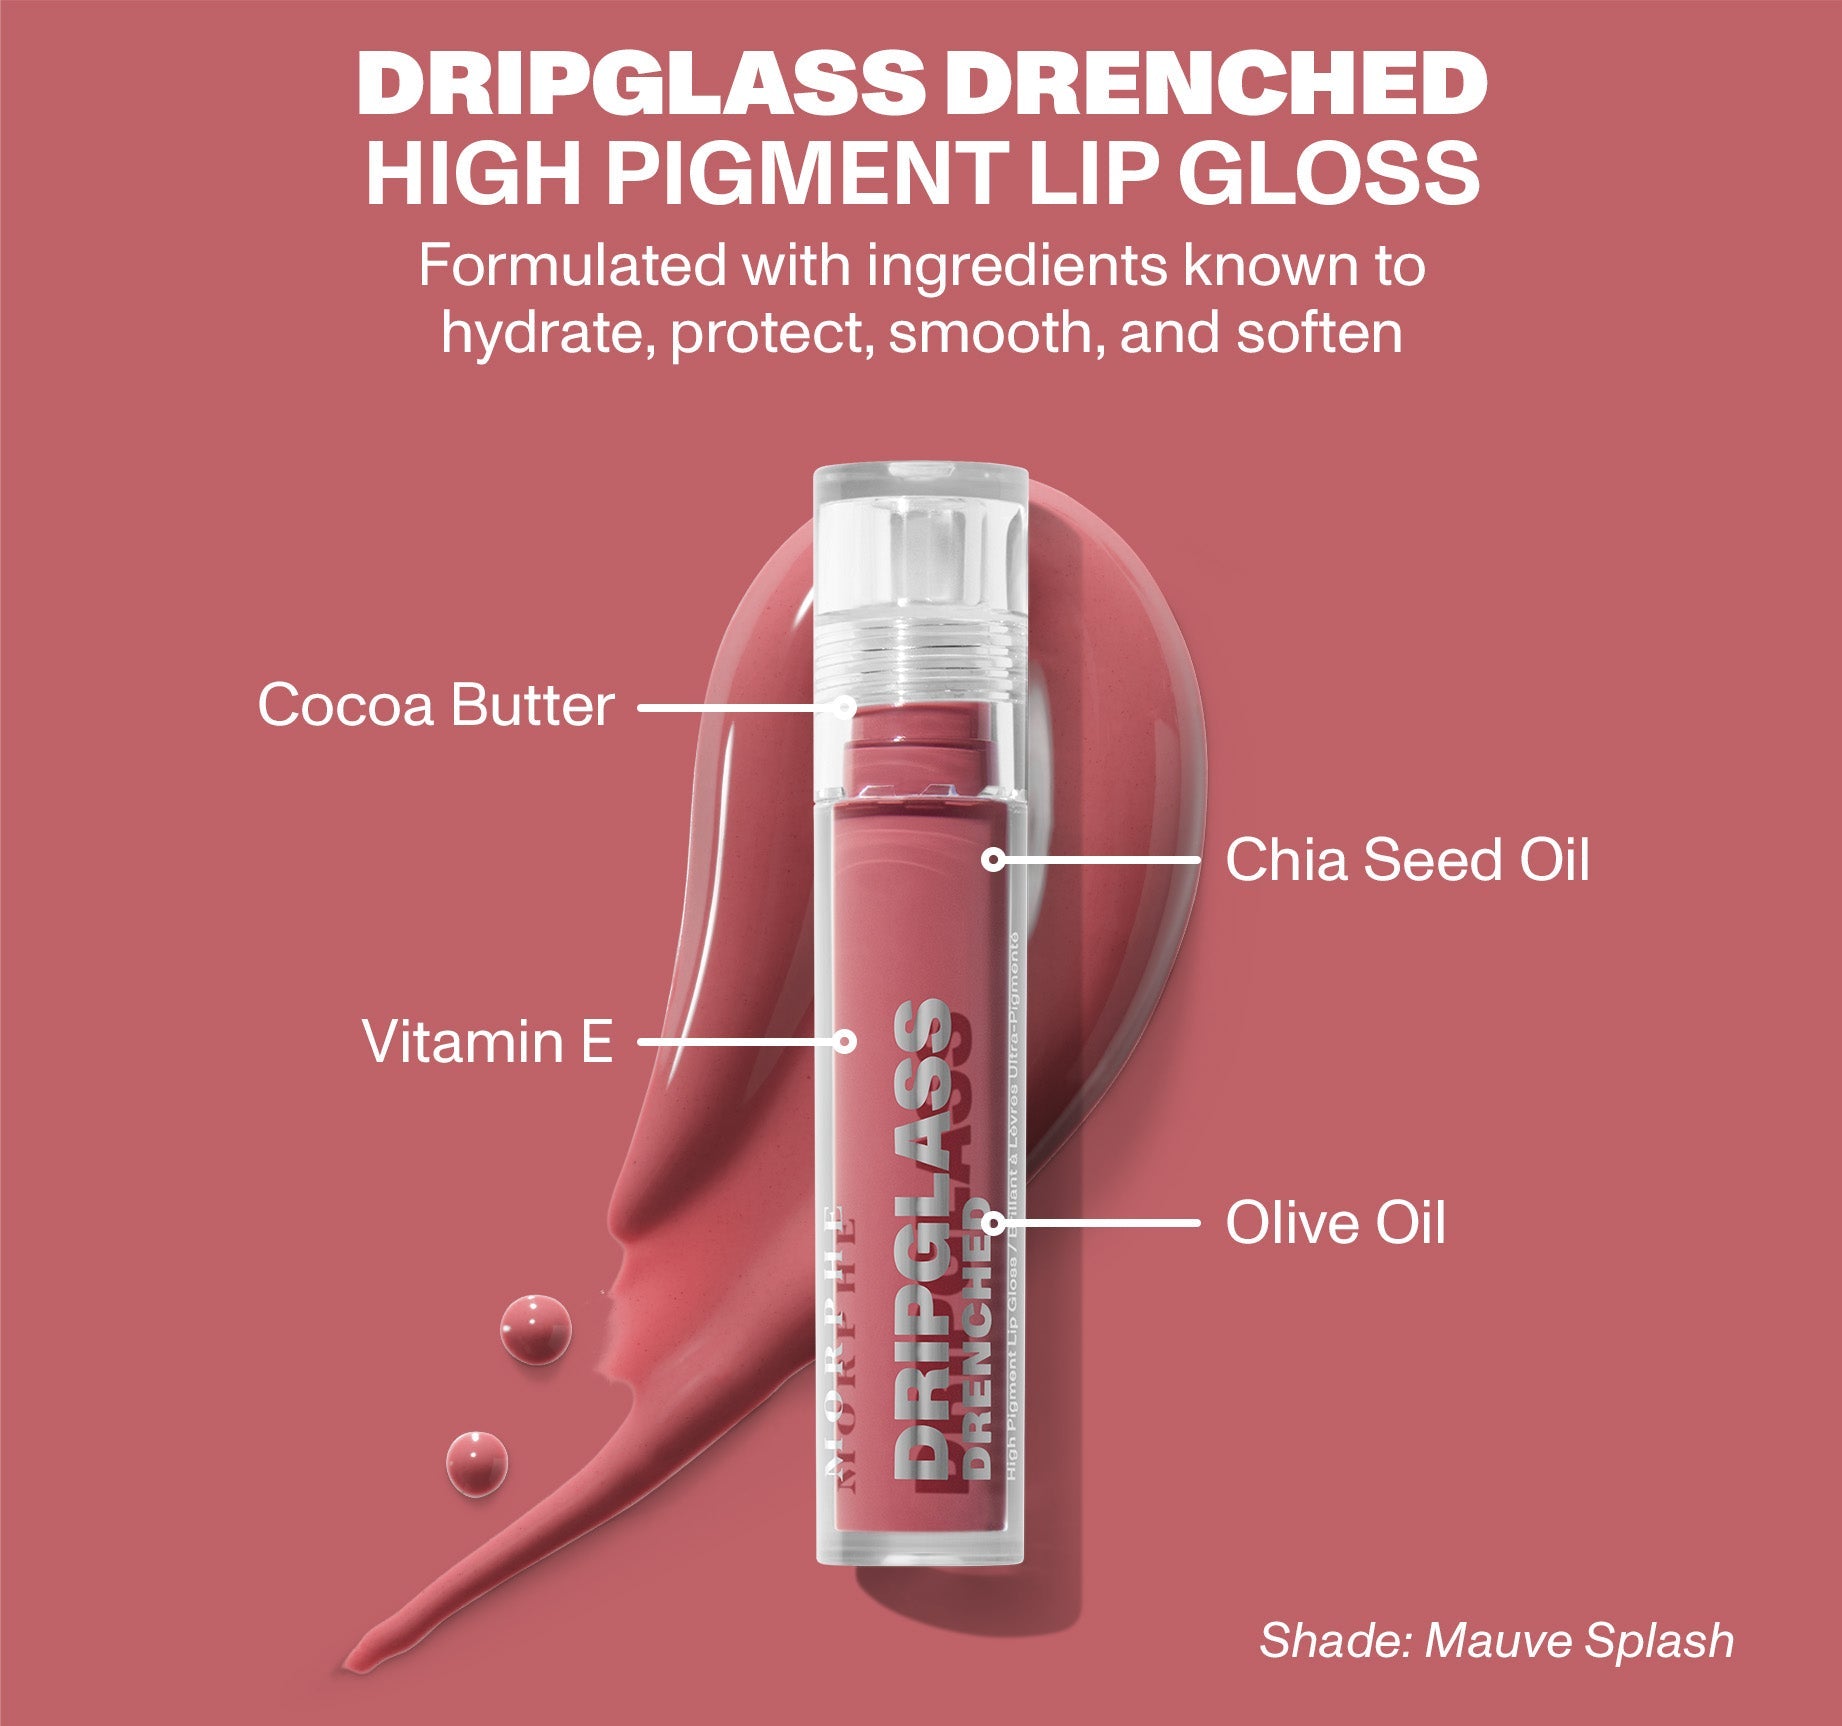 Dripglass Drenched High Pigment Lip Gloss - Deep Brick - Image 9